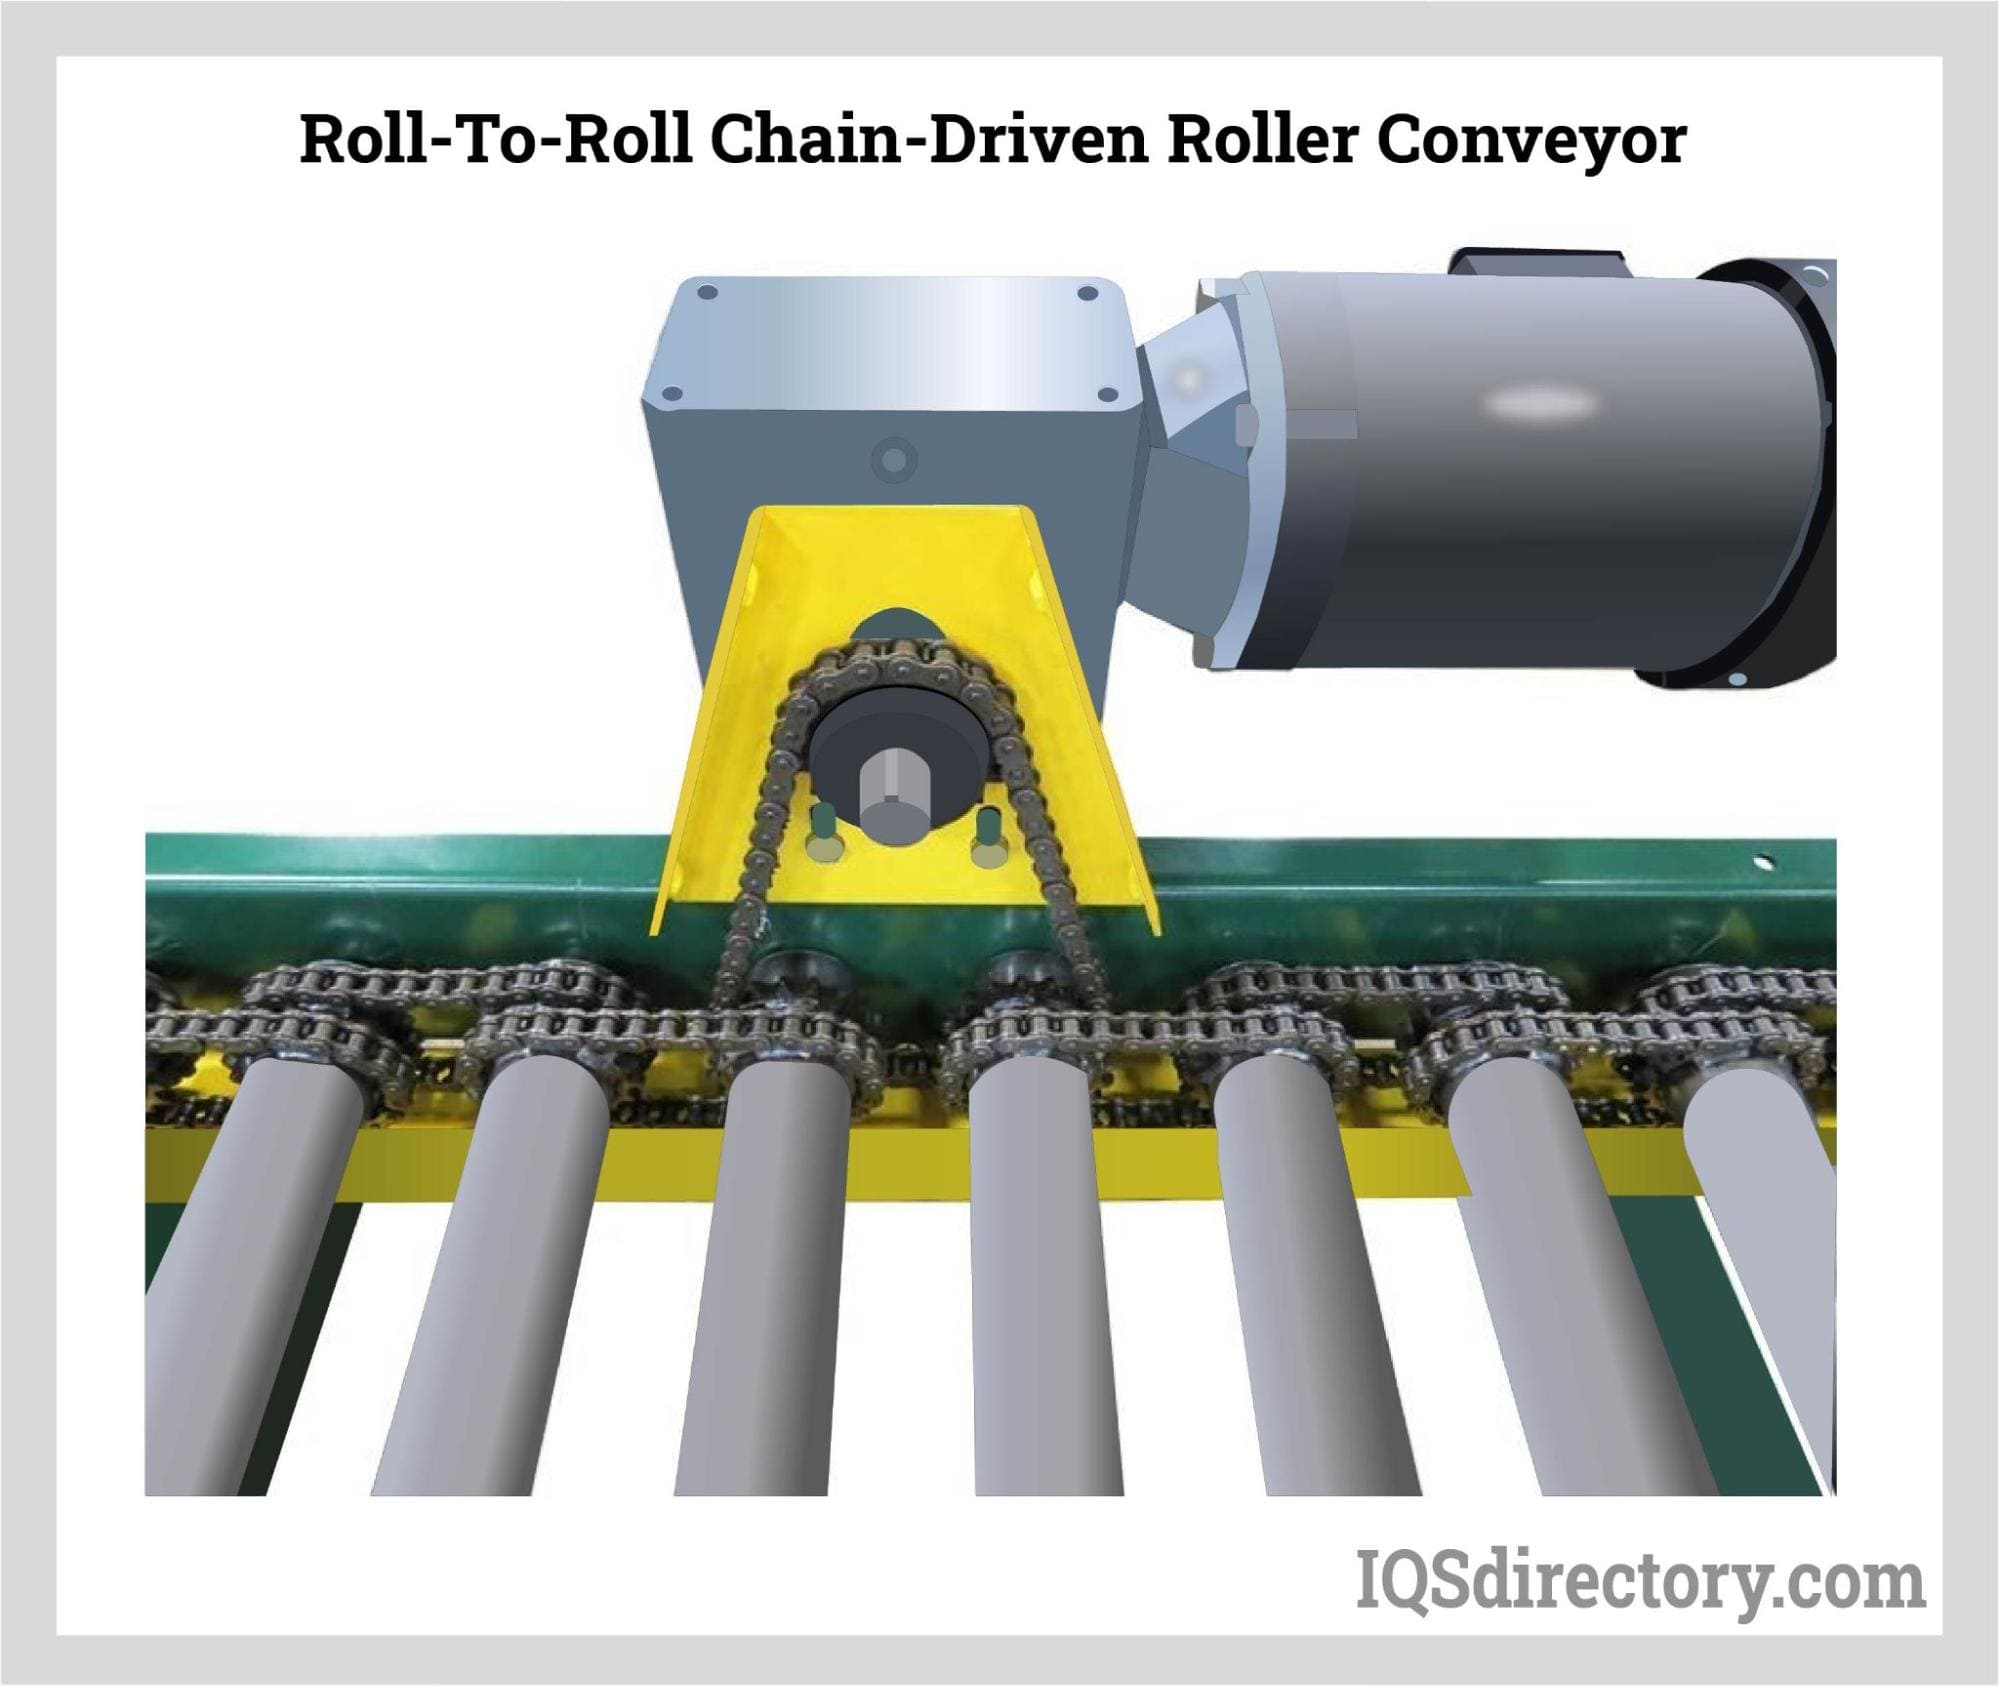 Roll-to-roll Chain-driven Roller Conveyor